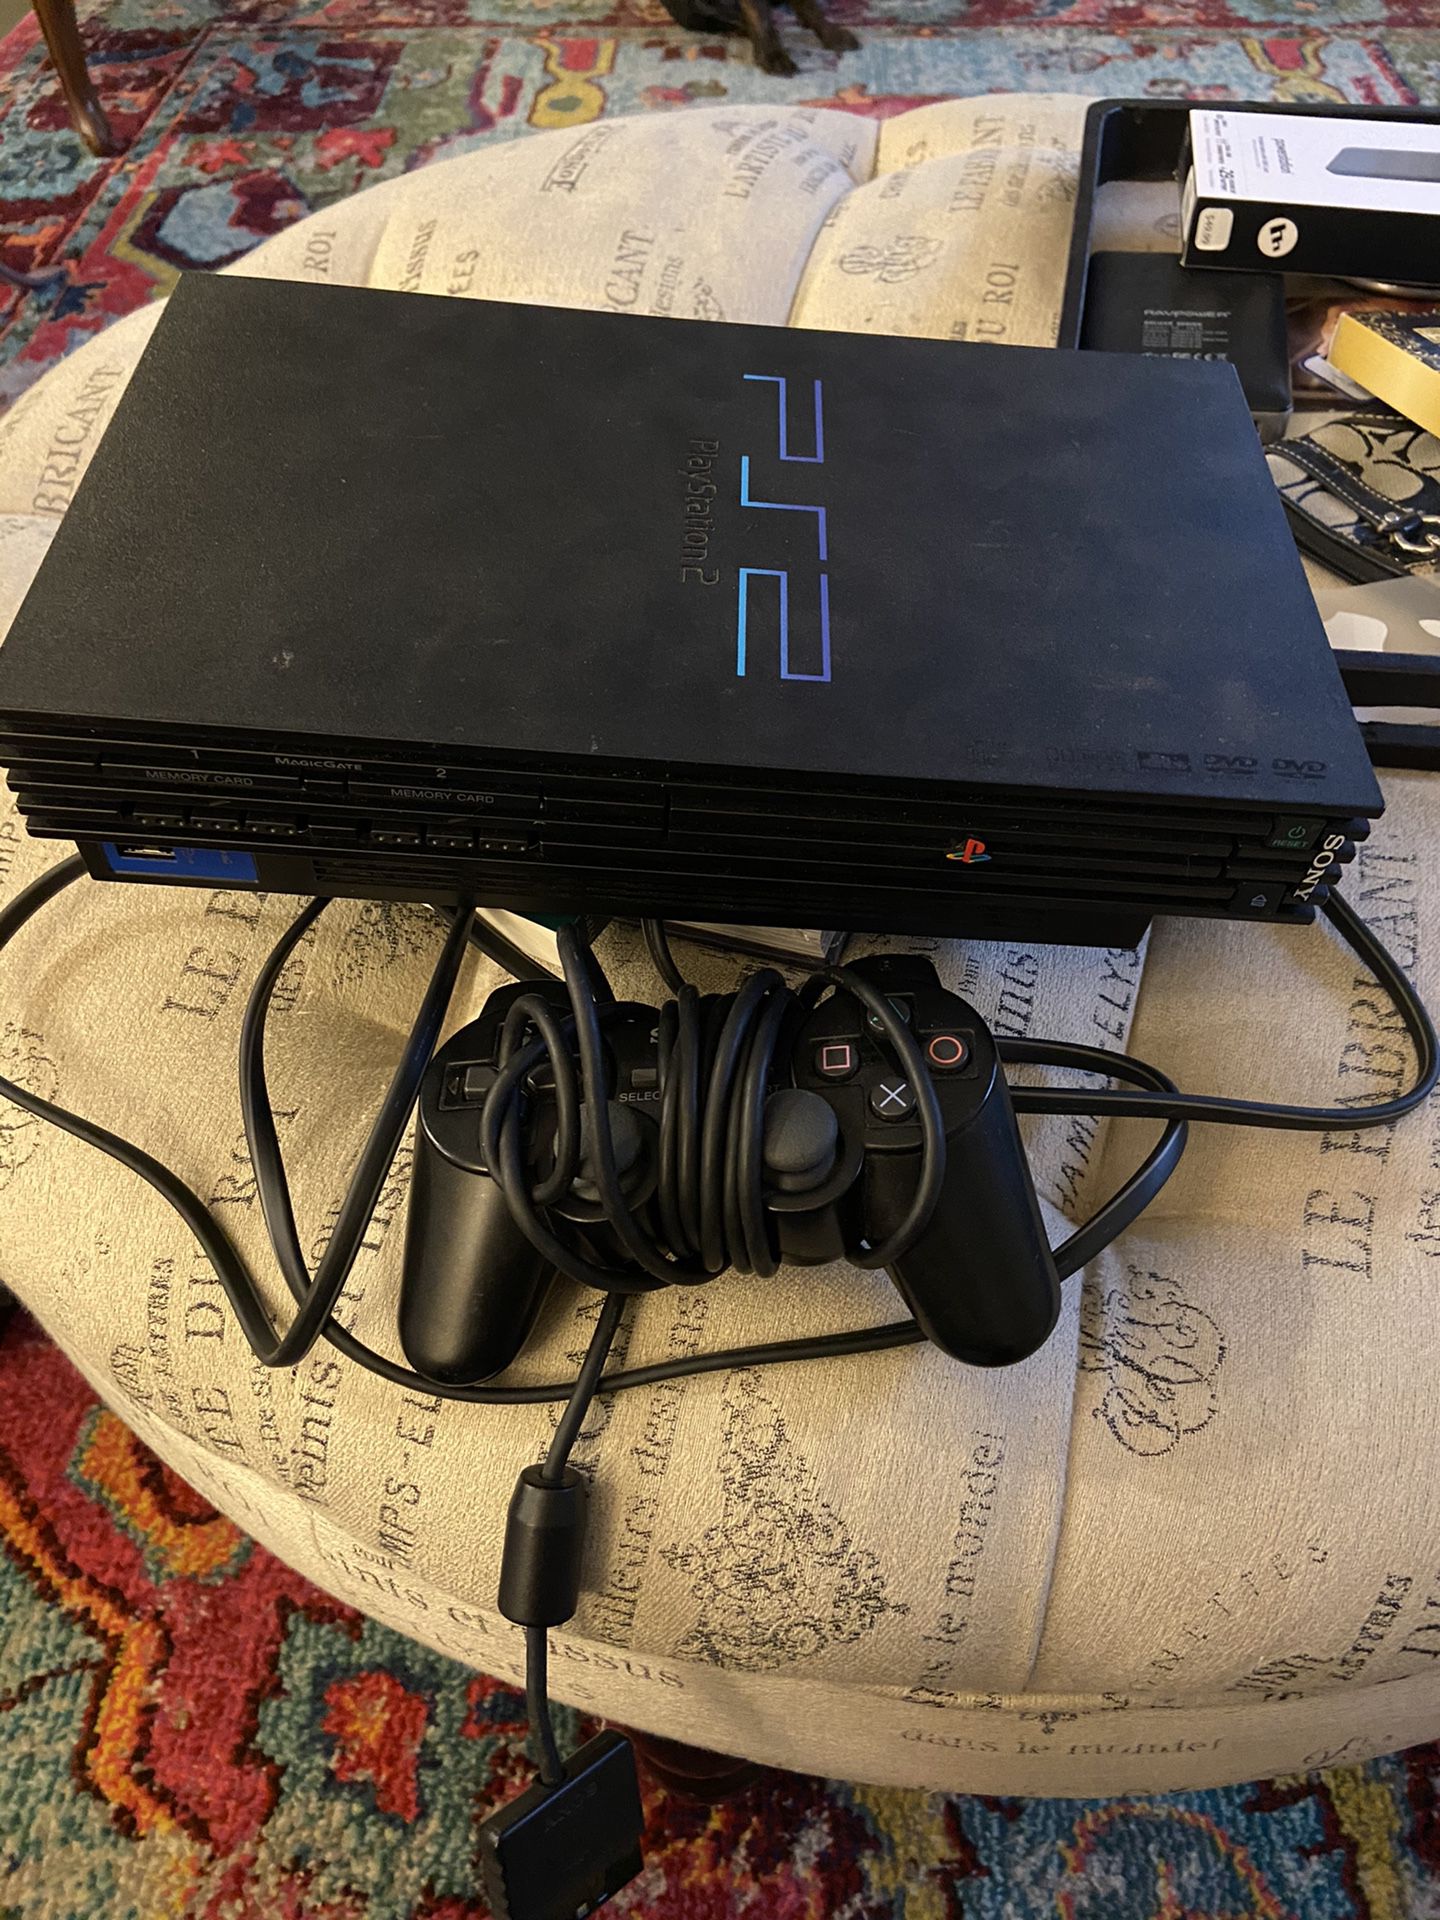 Ps2 with controller and power cord and 7 games